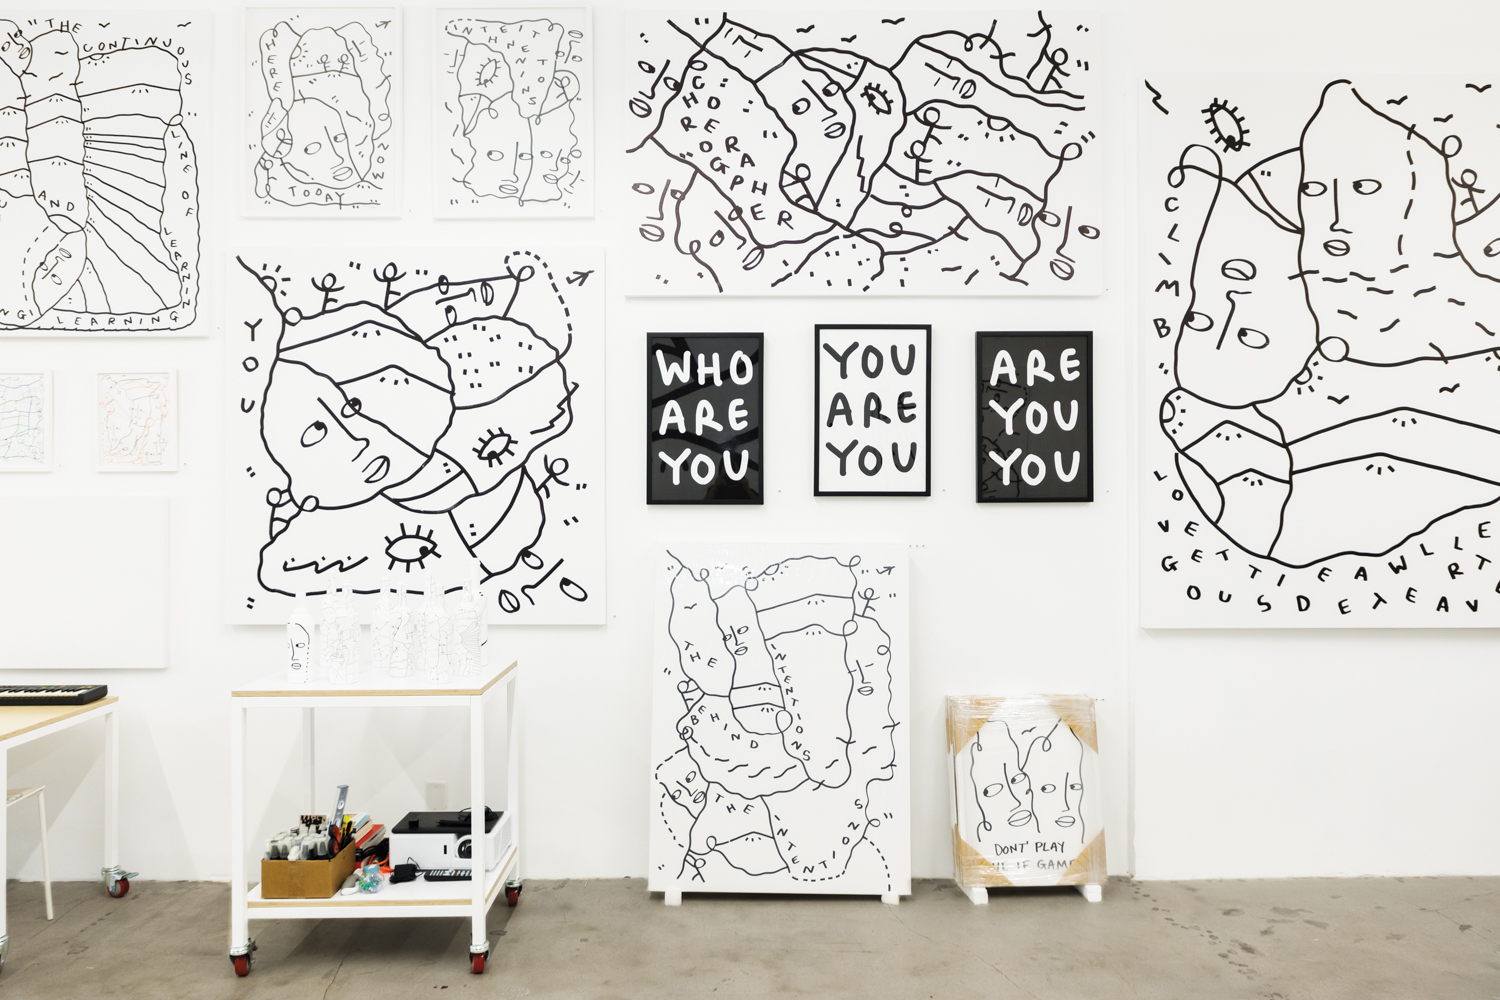 Artworks by Shantell Martin in her studio space, some hanging on the wall and other on the floor